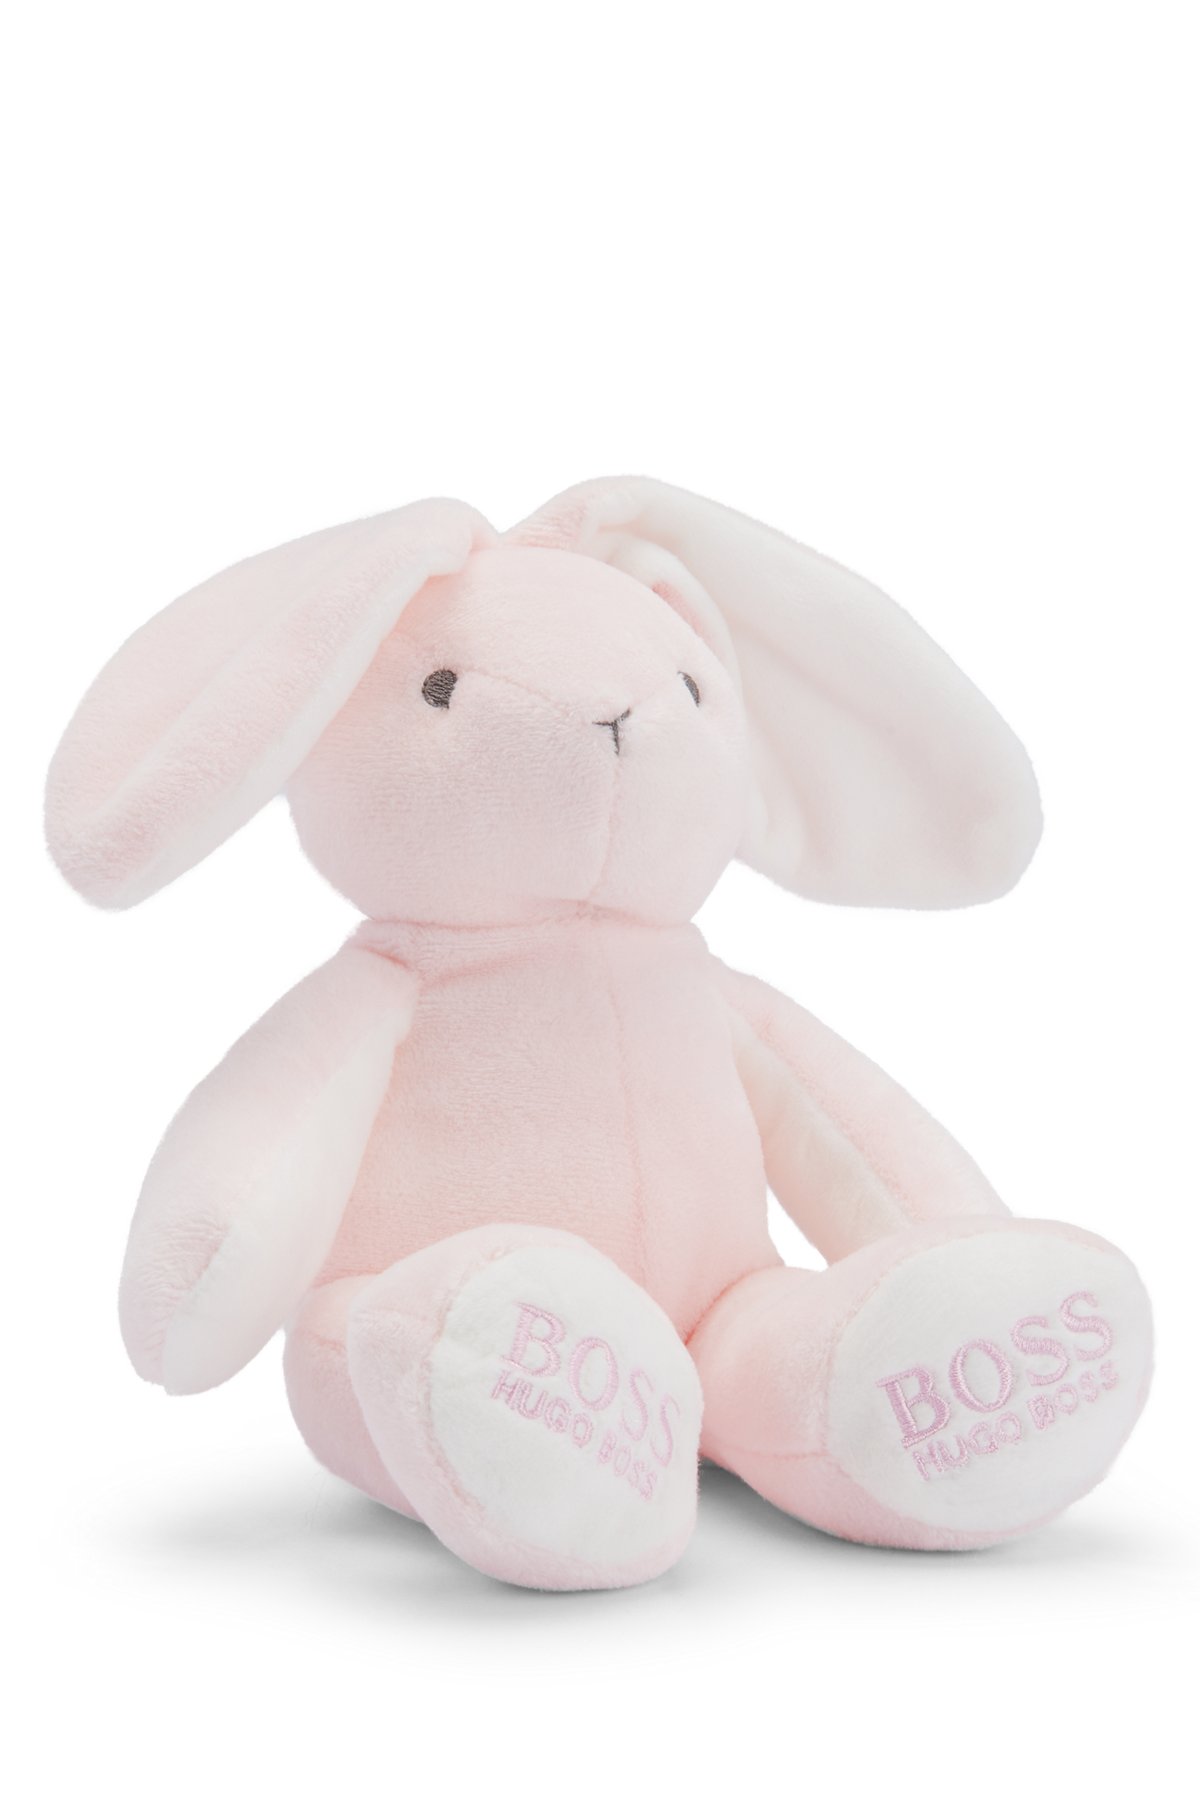 Baby bunny toy in faux fur with printed logos, light pink